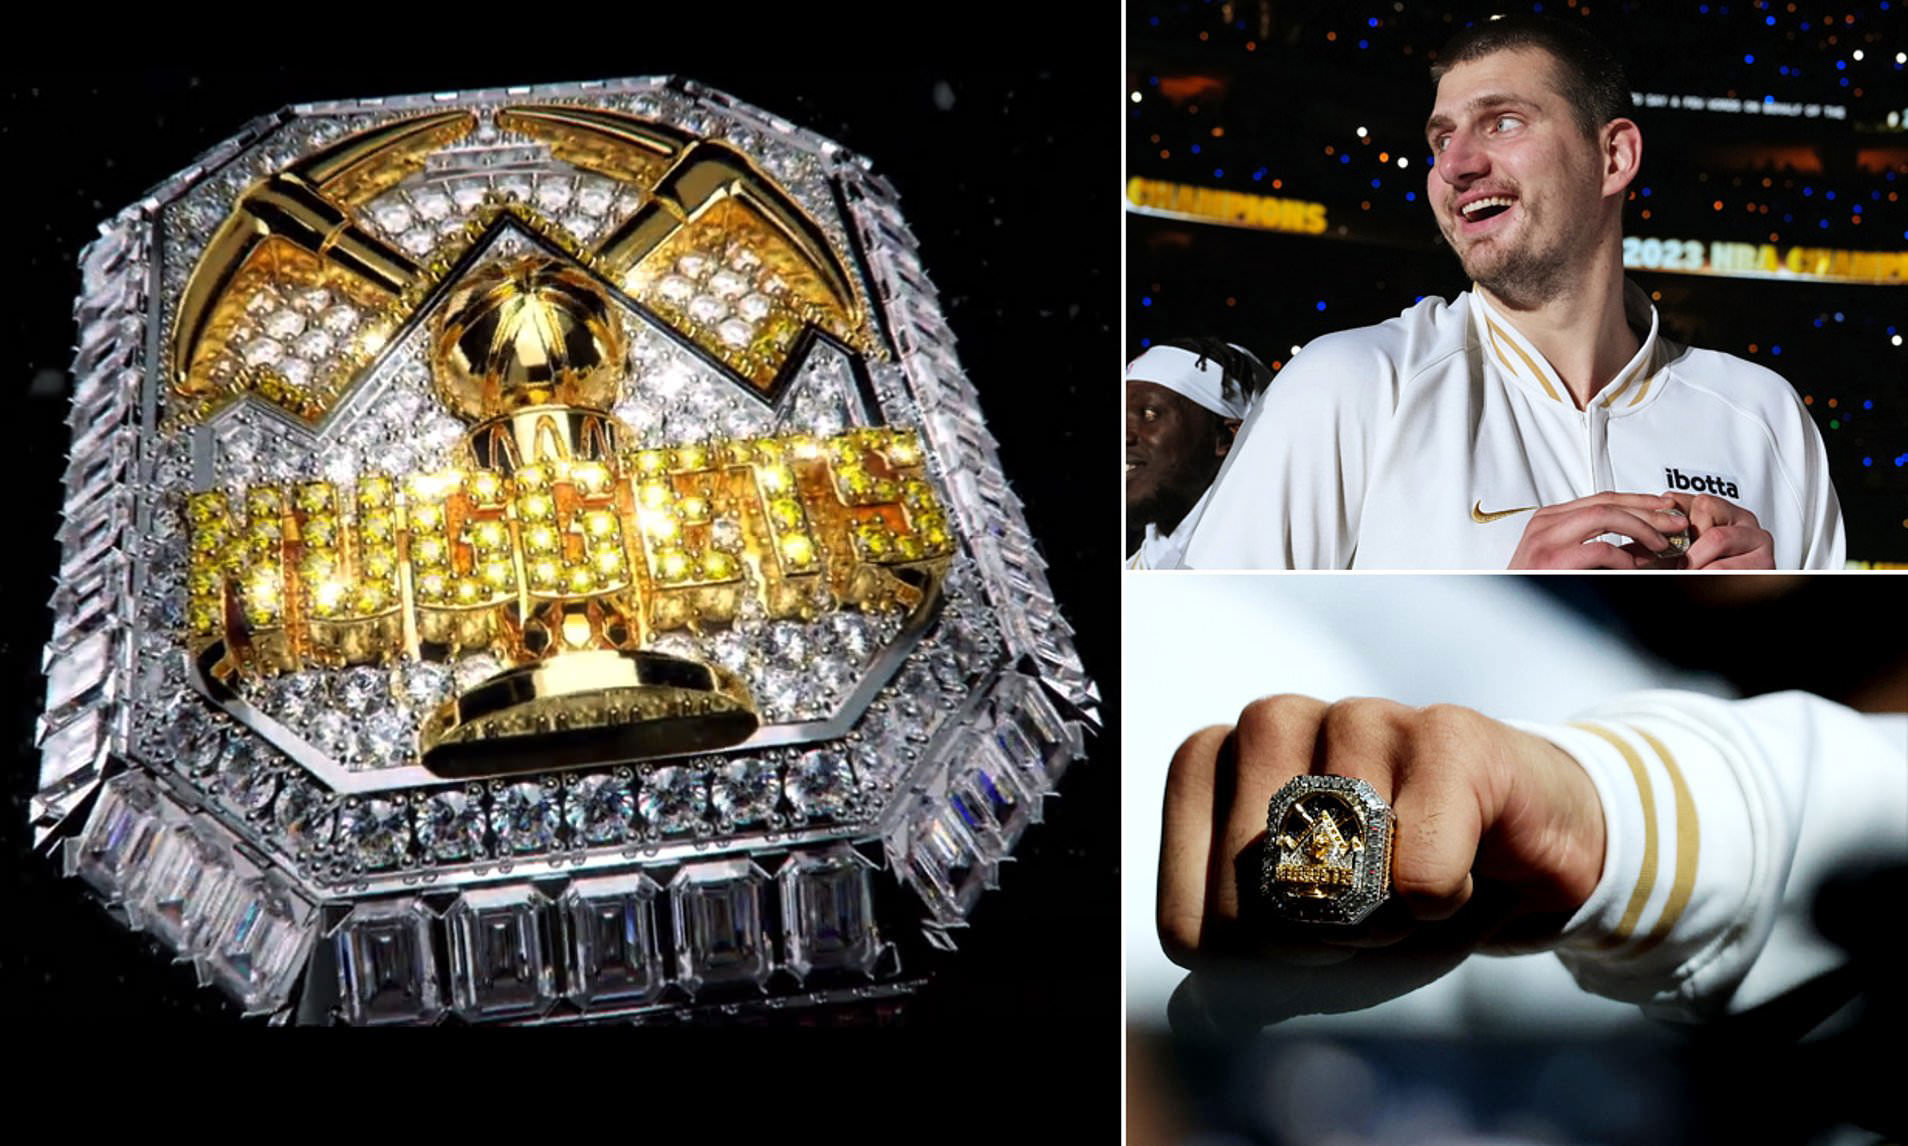 REVEALED Touching details behind Nuggets' championship ring